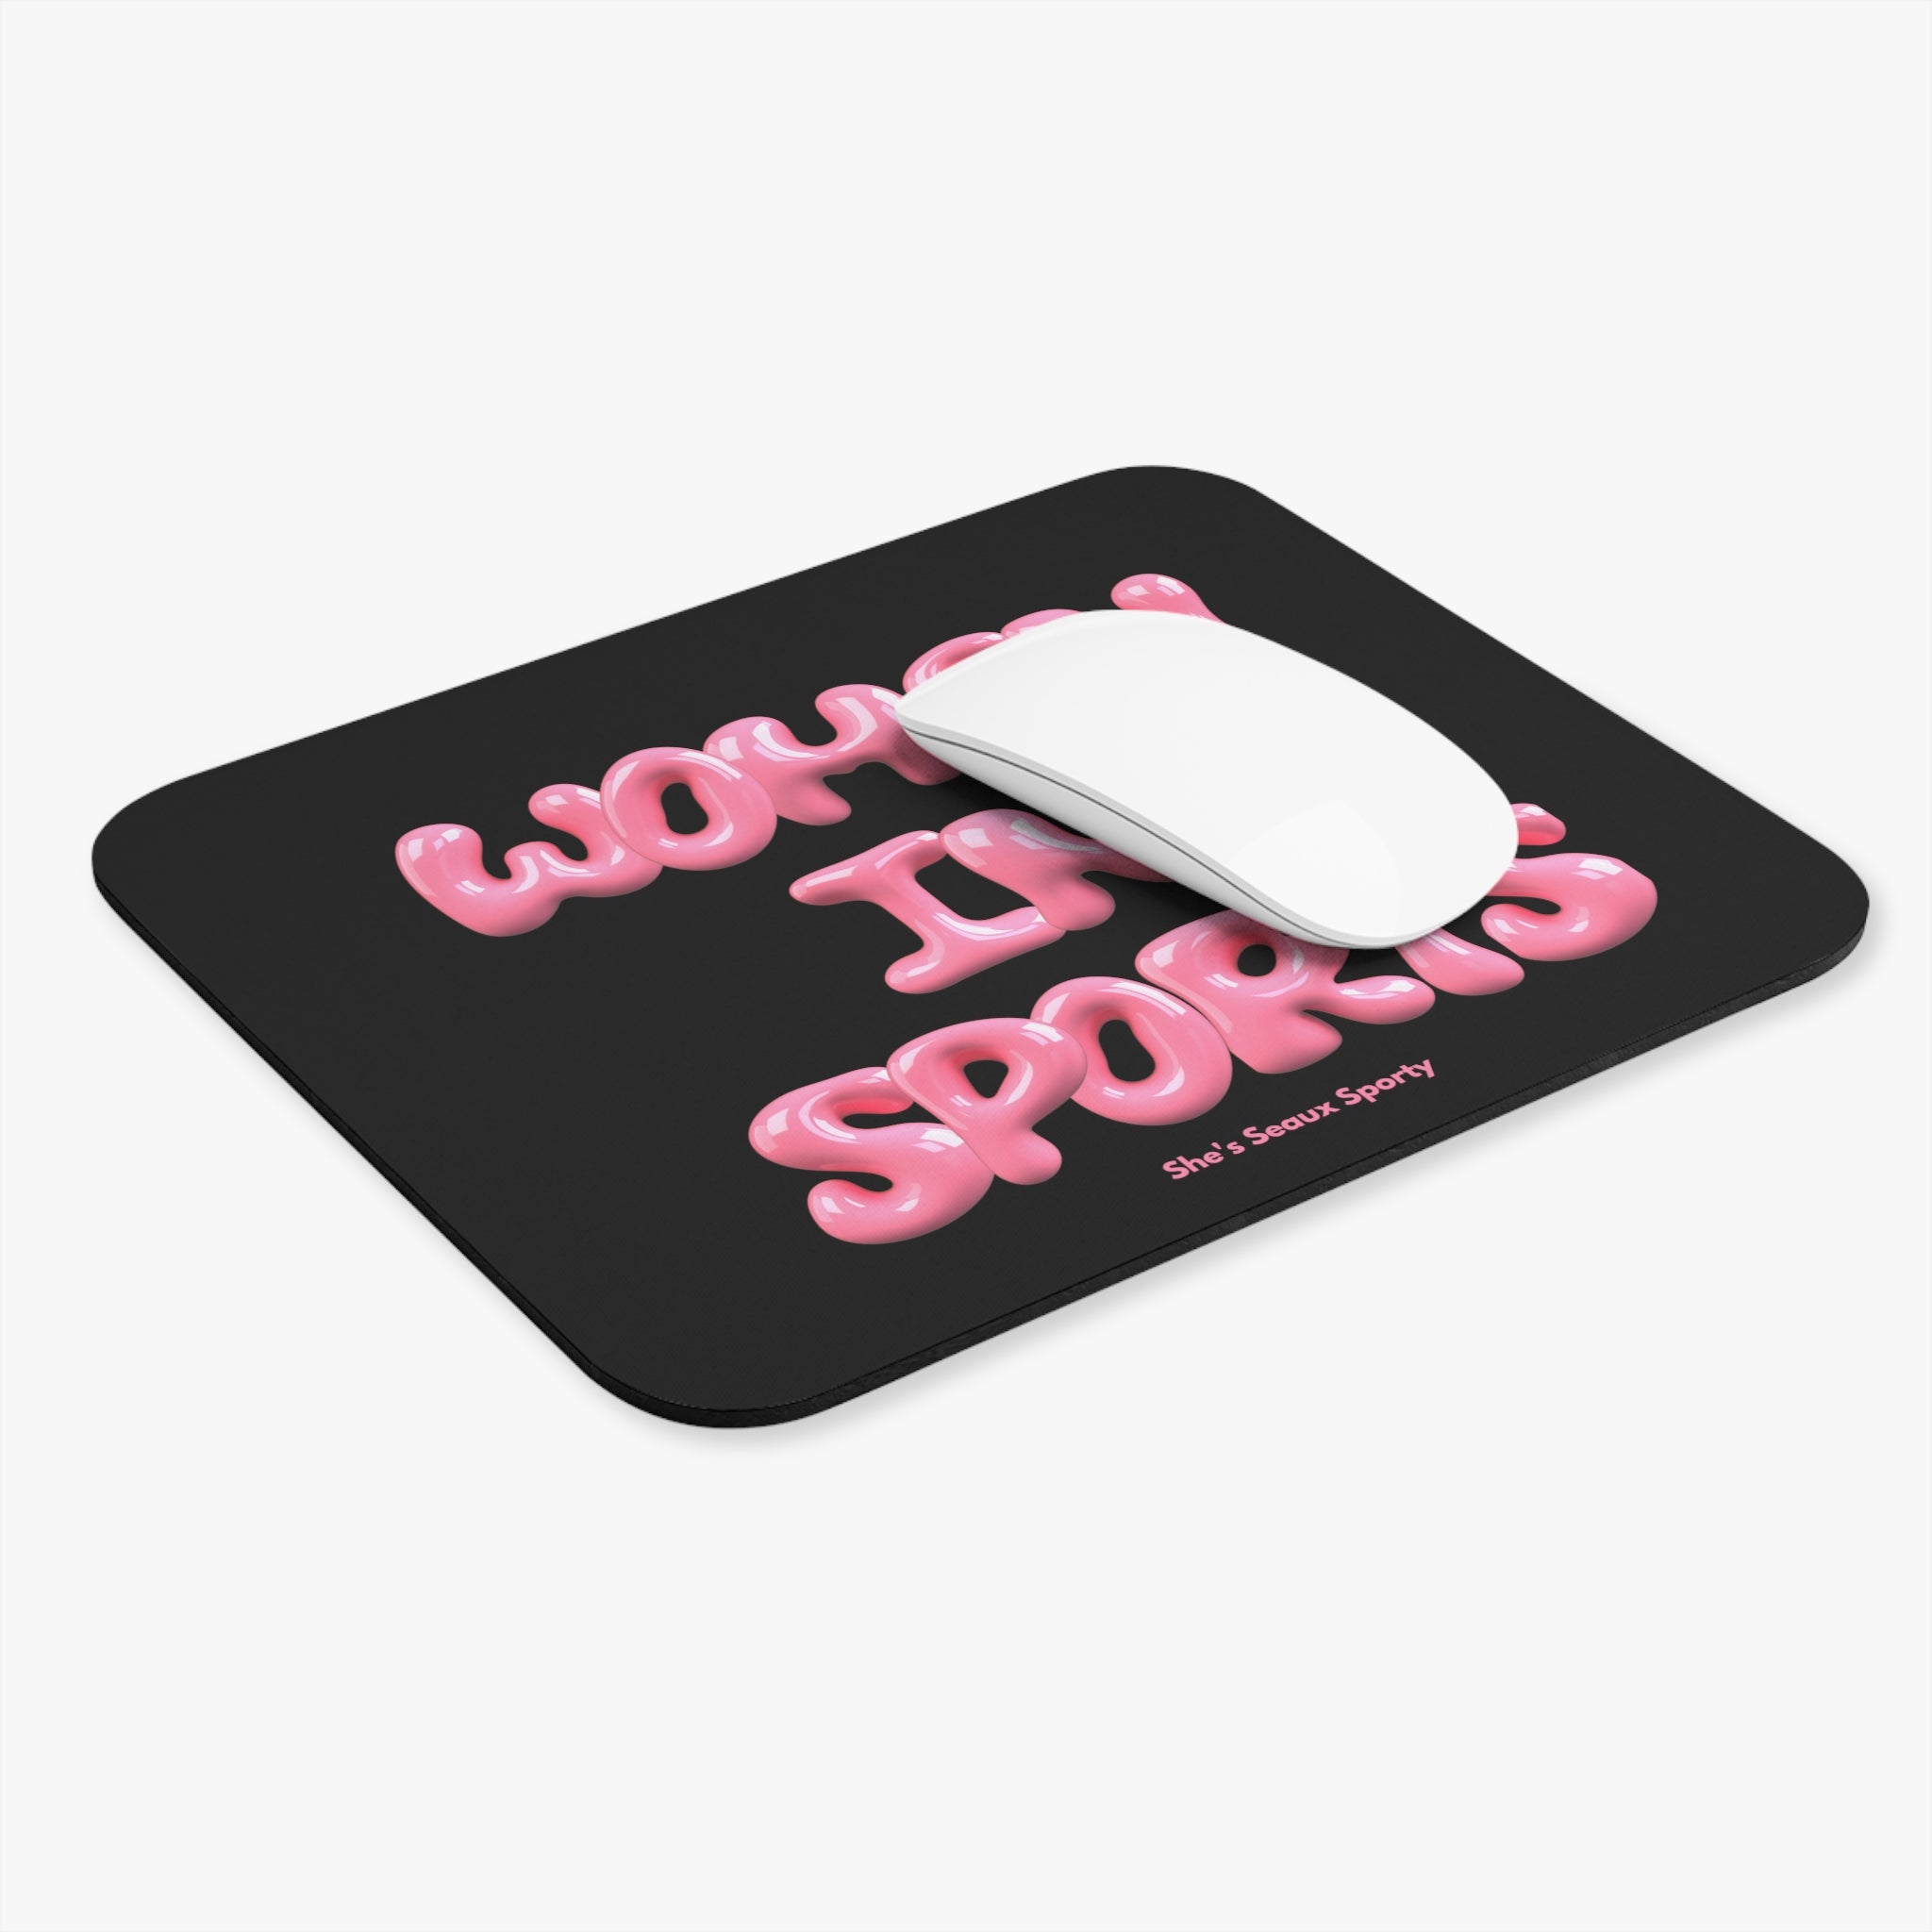 Black Women In Sports Mouse Pad